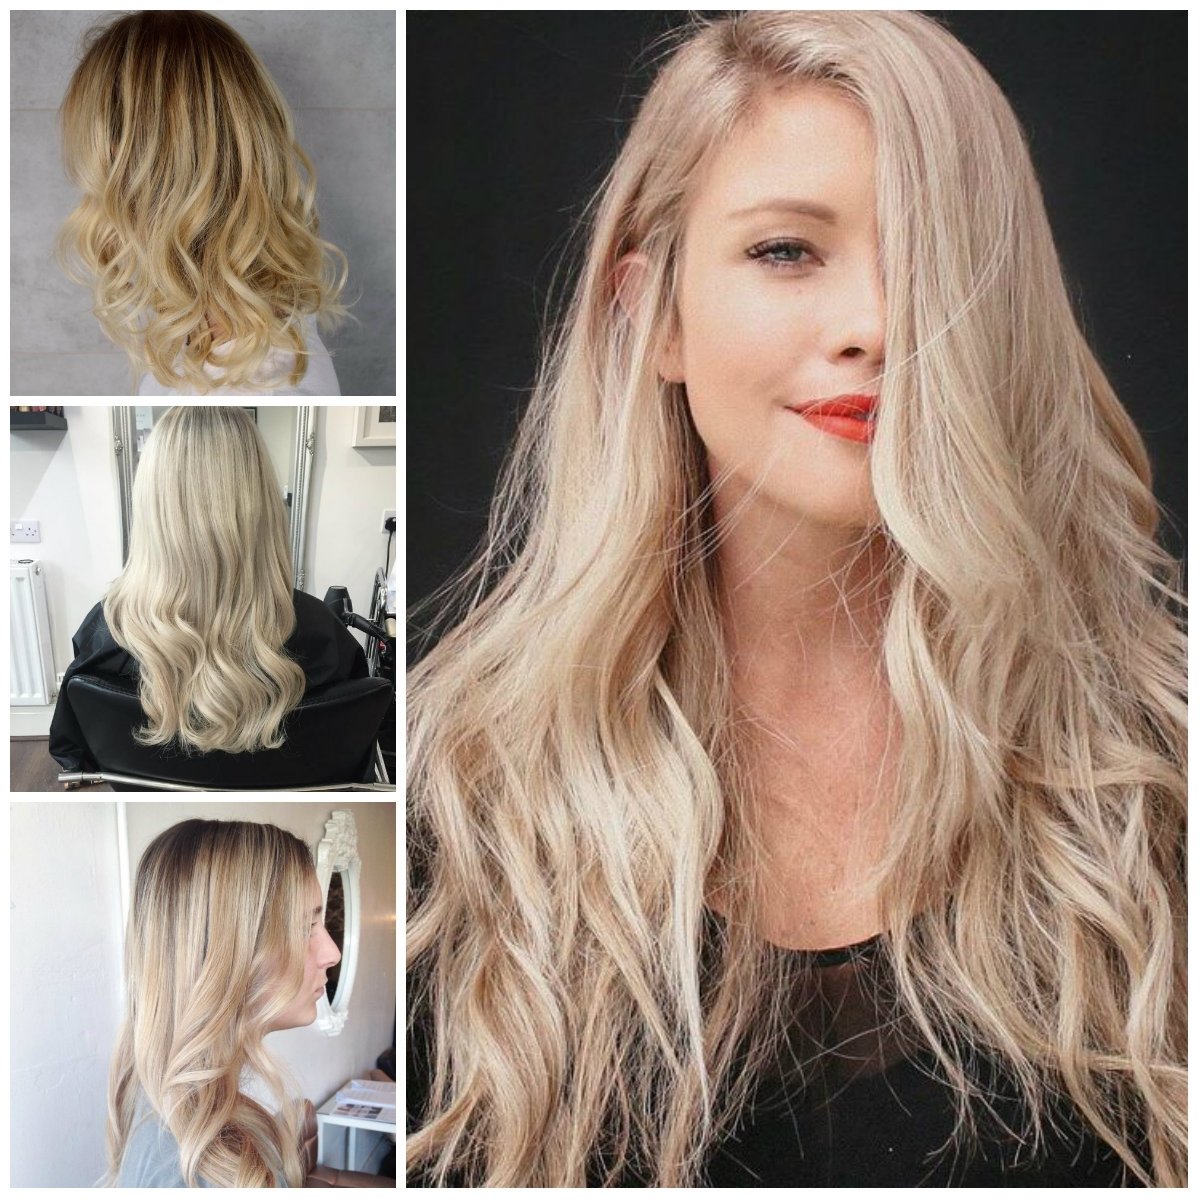 10 Great Hair Color Ideas For Blondes light blonde hair color ideas for 2017 best hair color ideas 2022